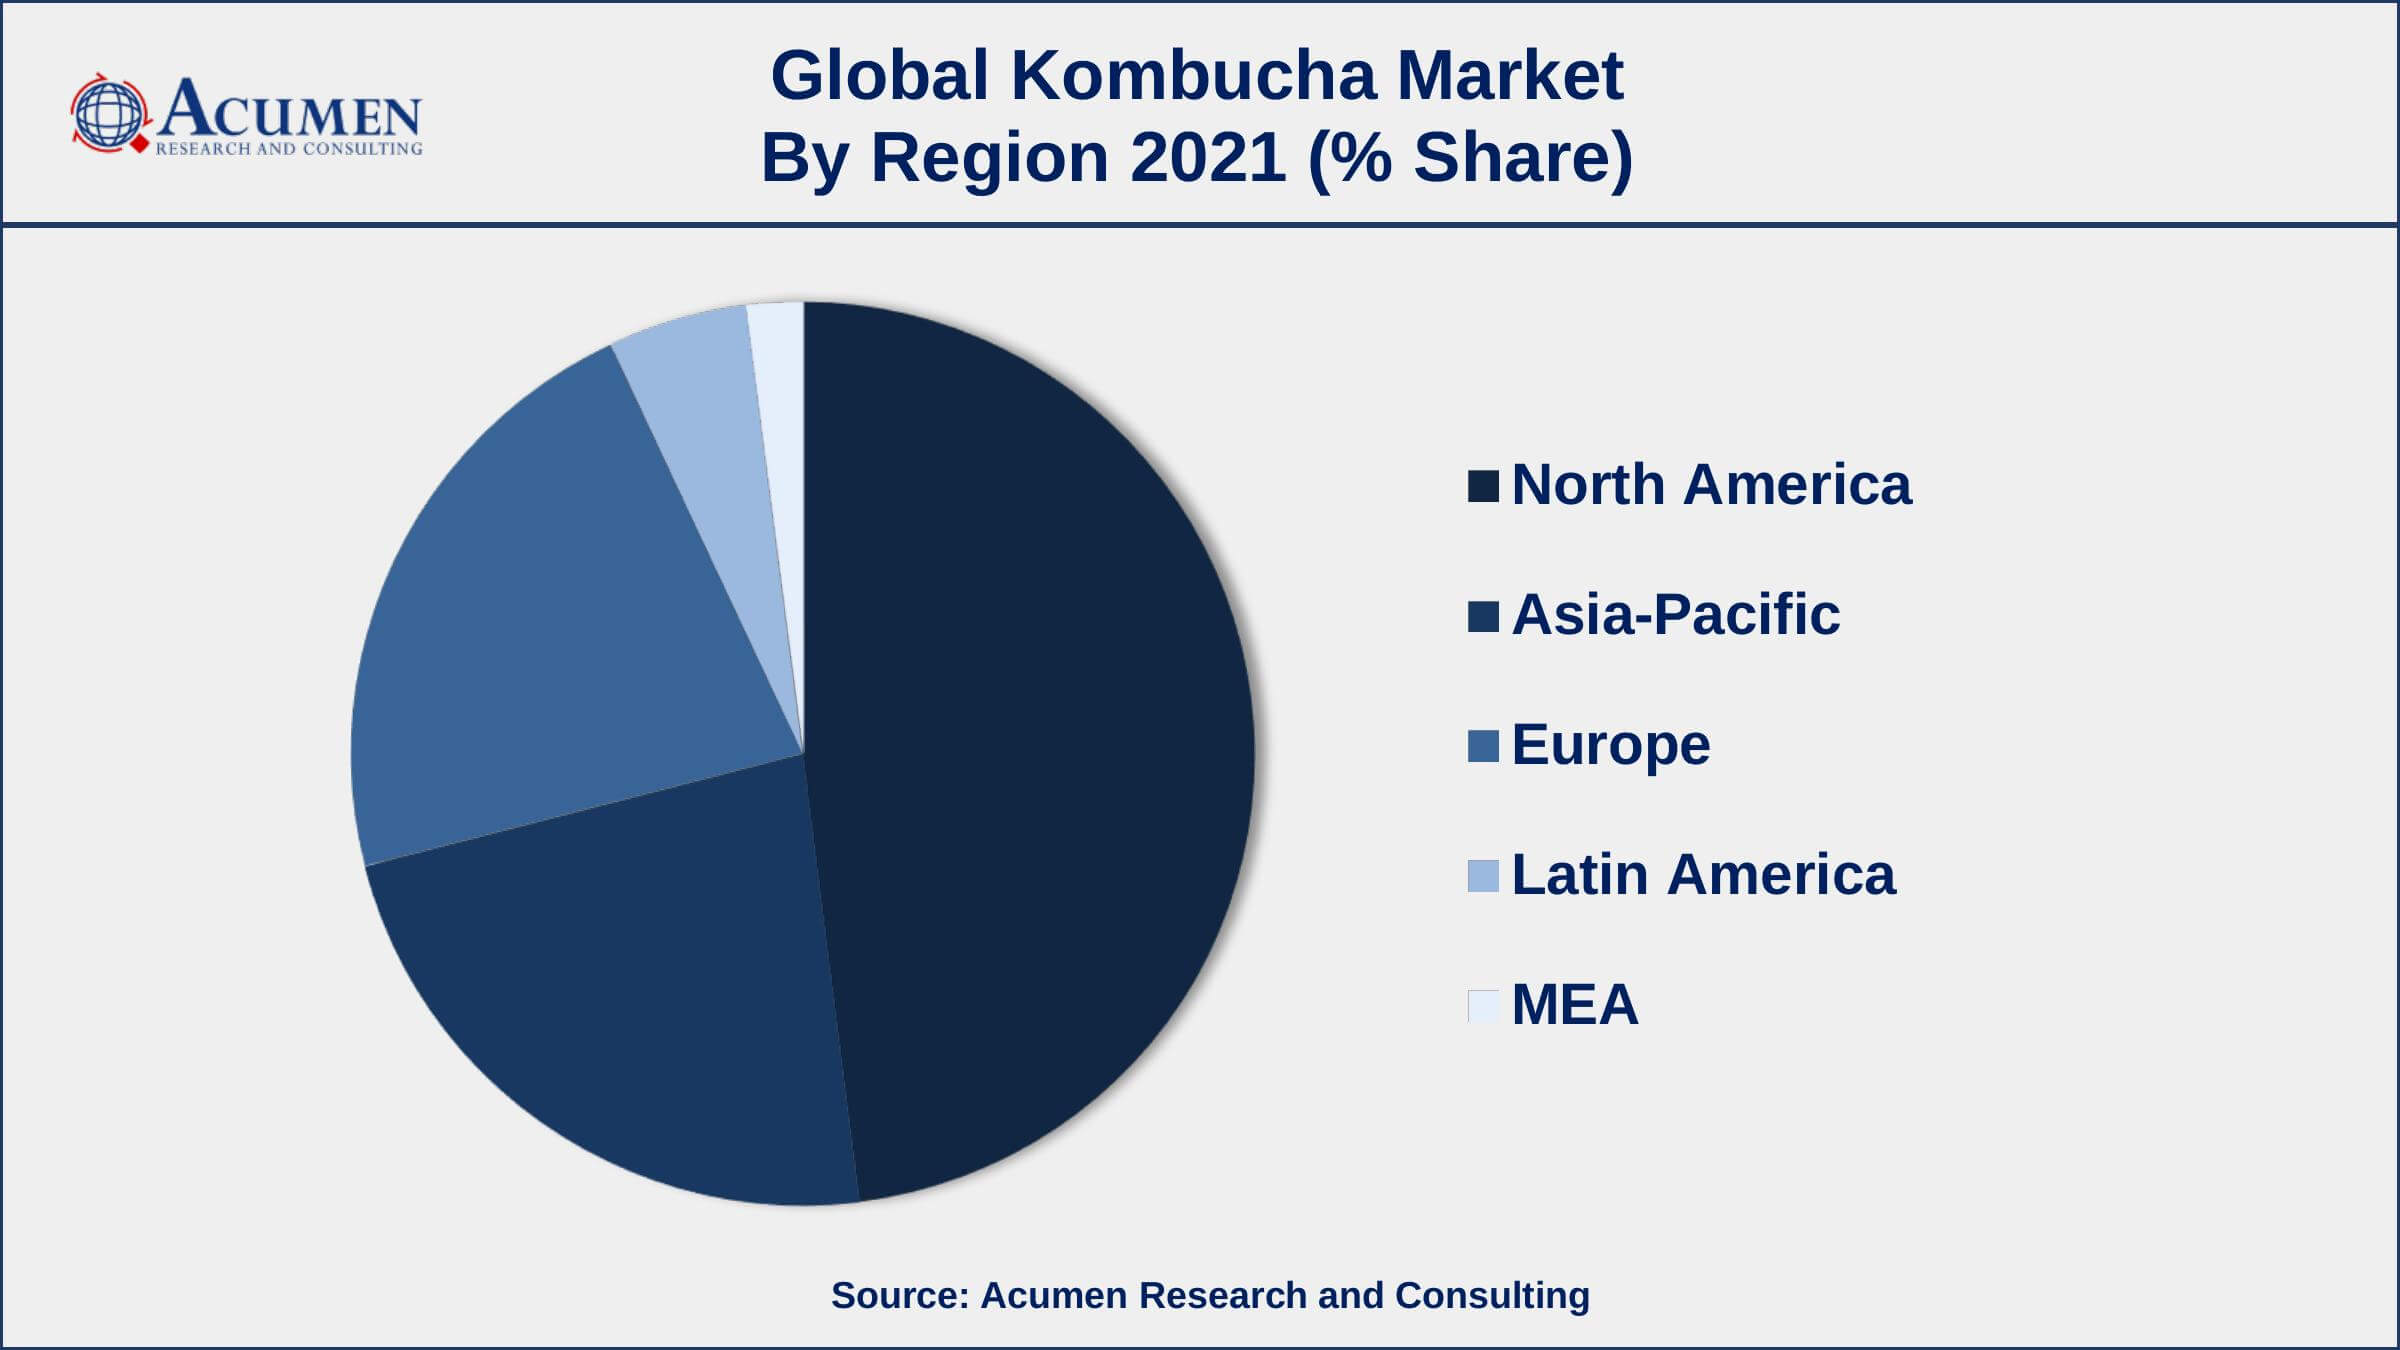 North America Holds The Largest Share Of The Global Kombucha Market